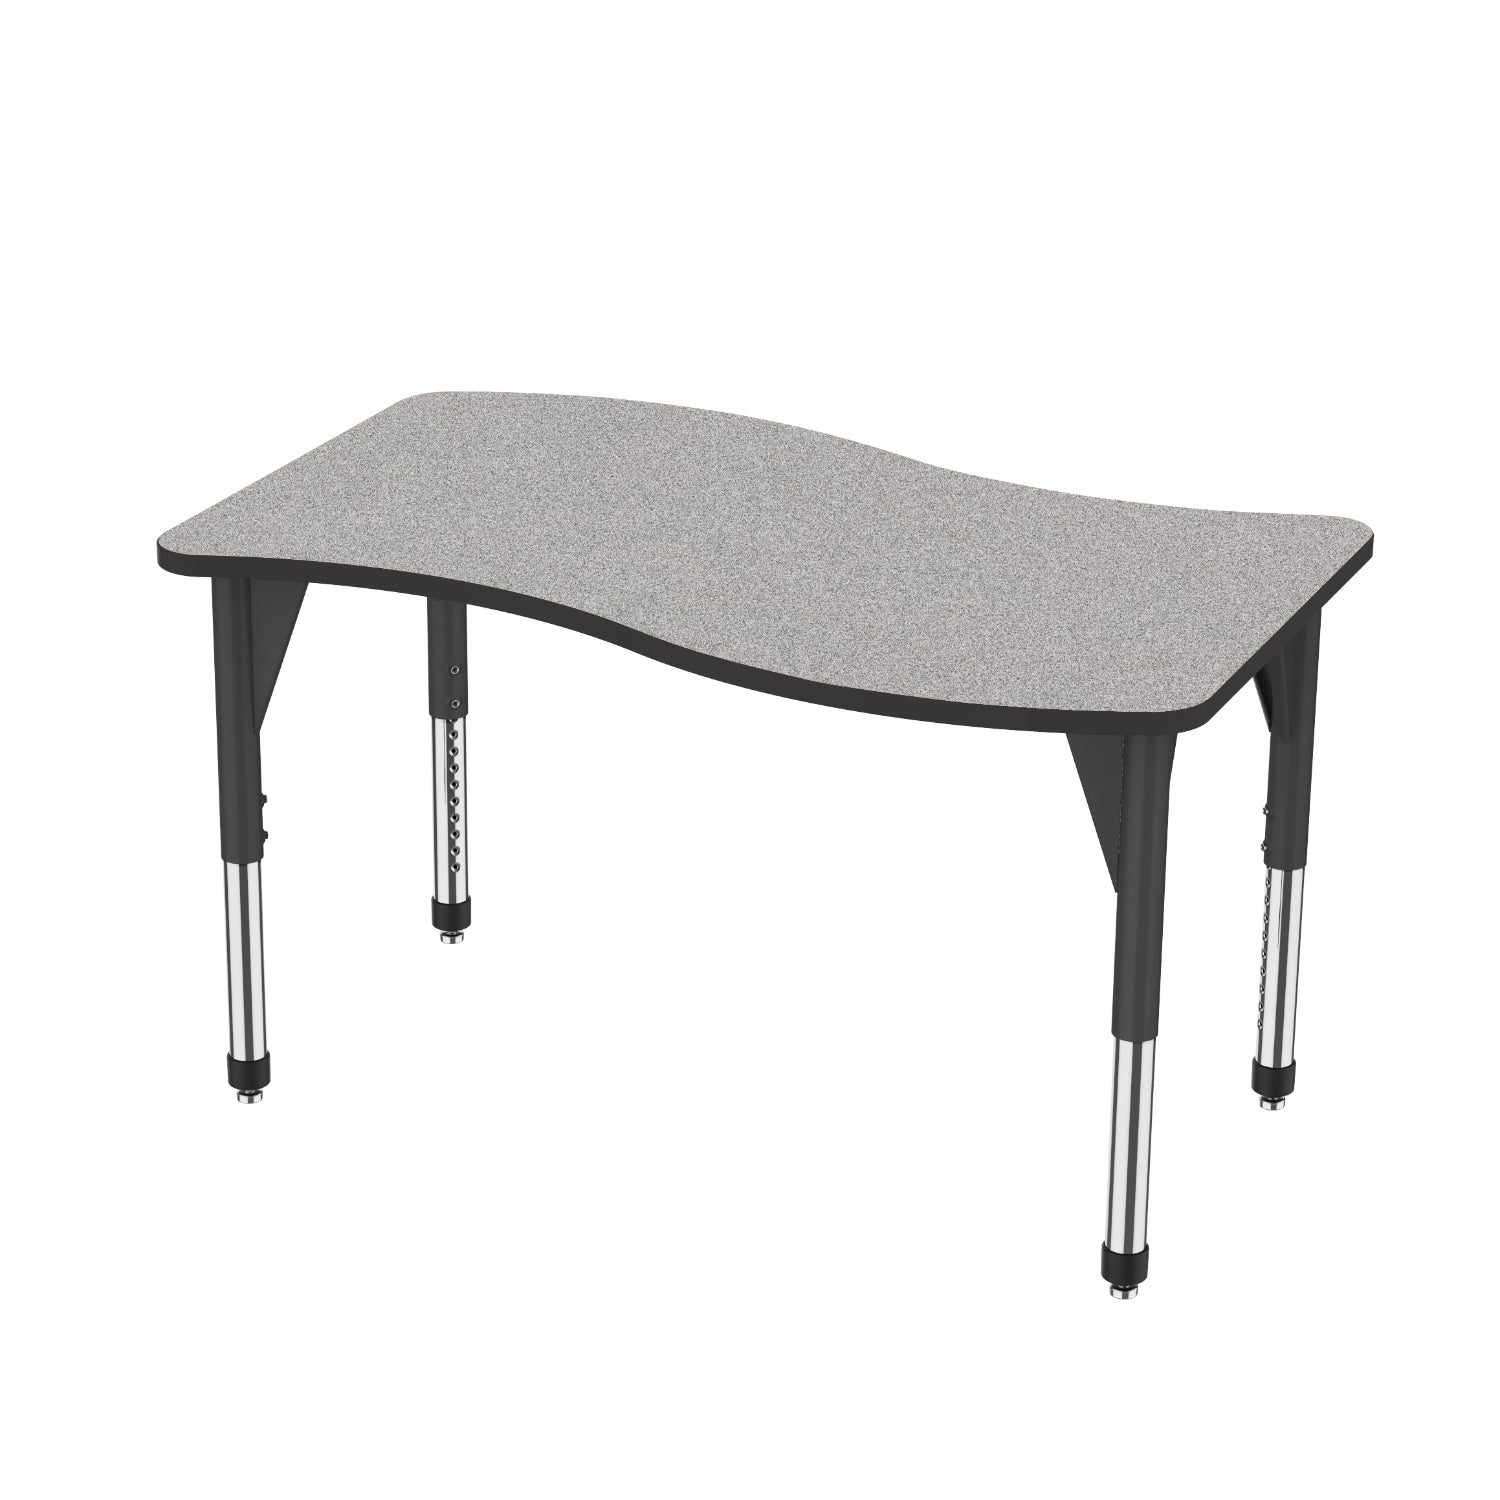 Premier Sitting Height Collaborative Classroom Table, 30" x 54" Wave